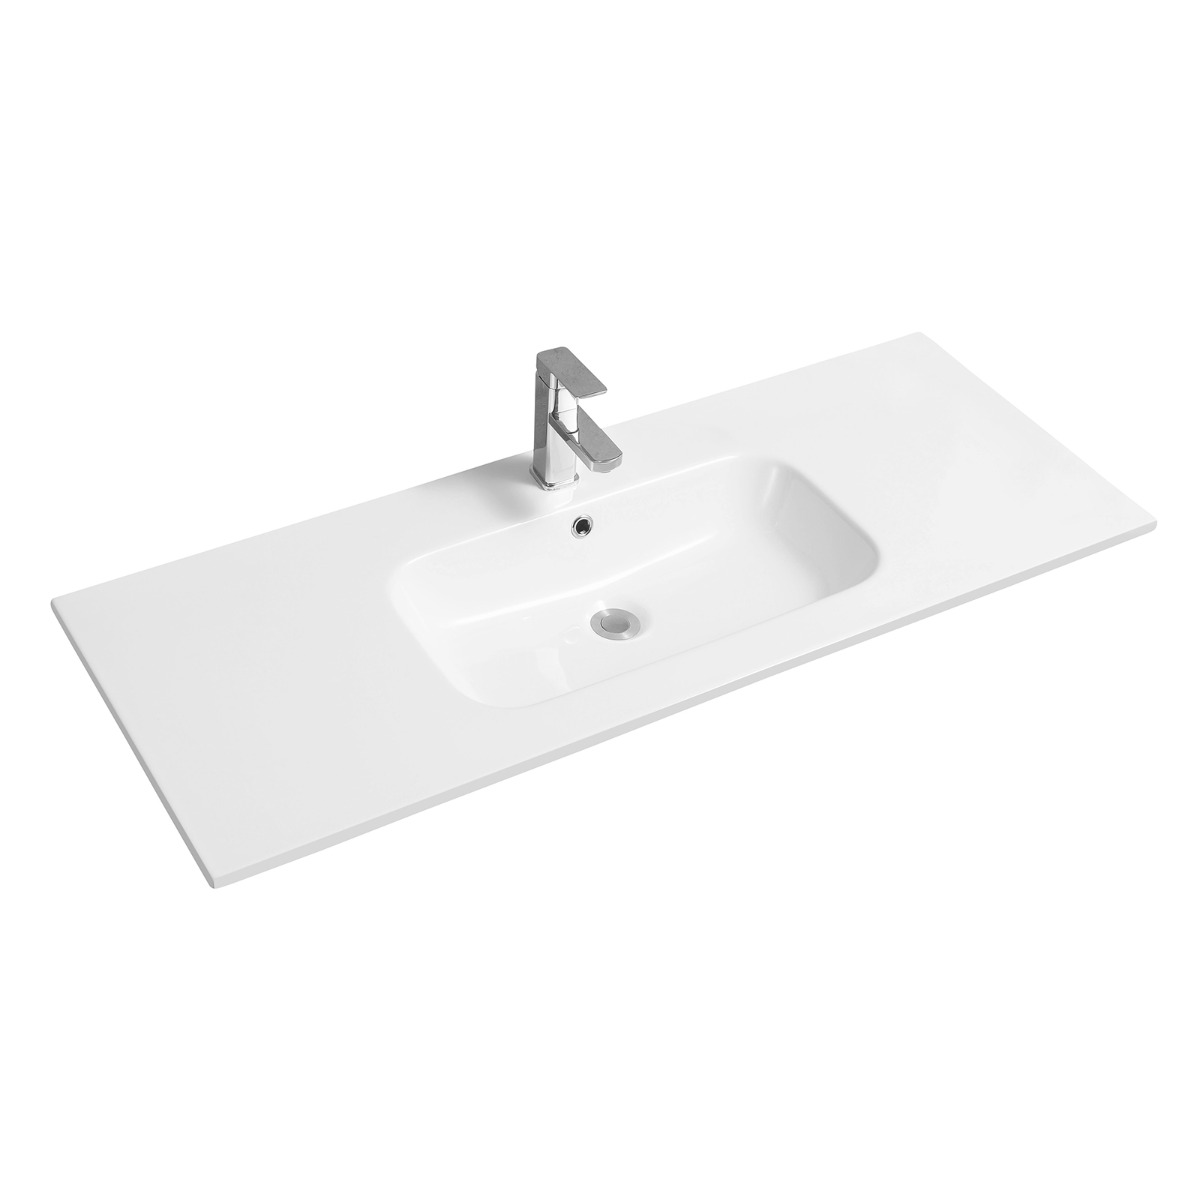 4010 Ceramic 121cm Thin-Edge Inset Basin with Oval Bowl